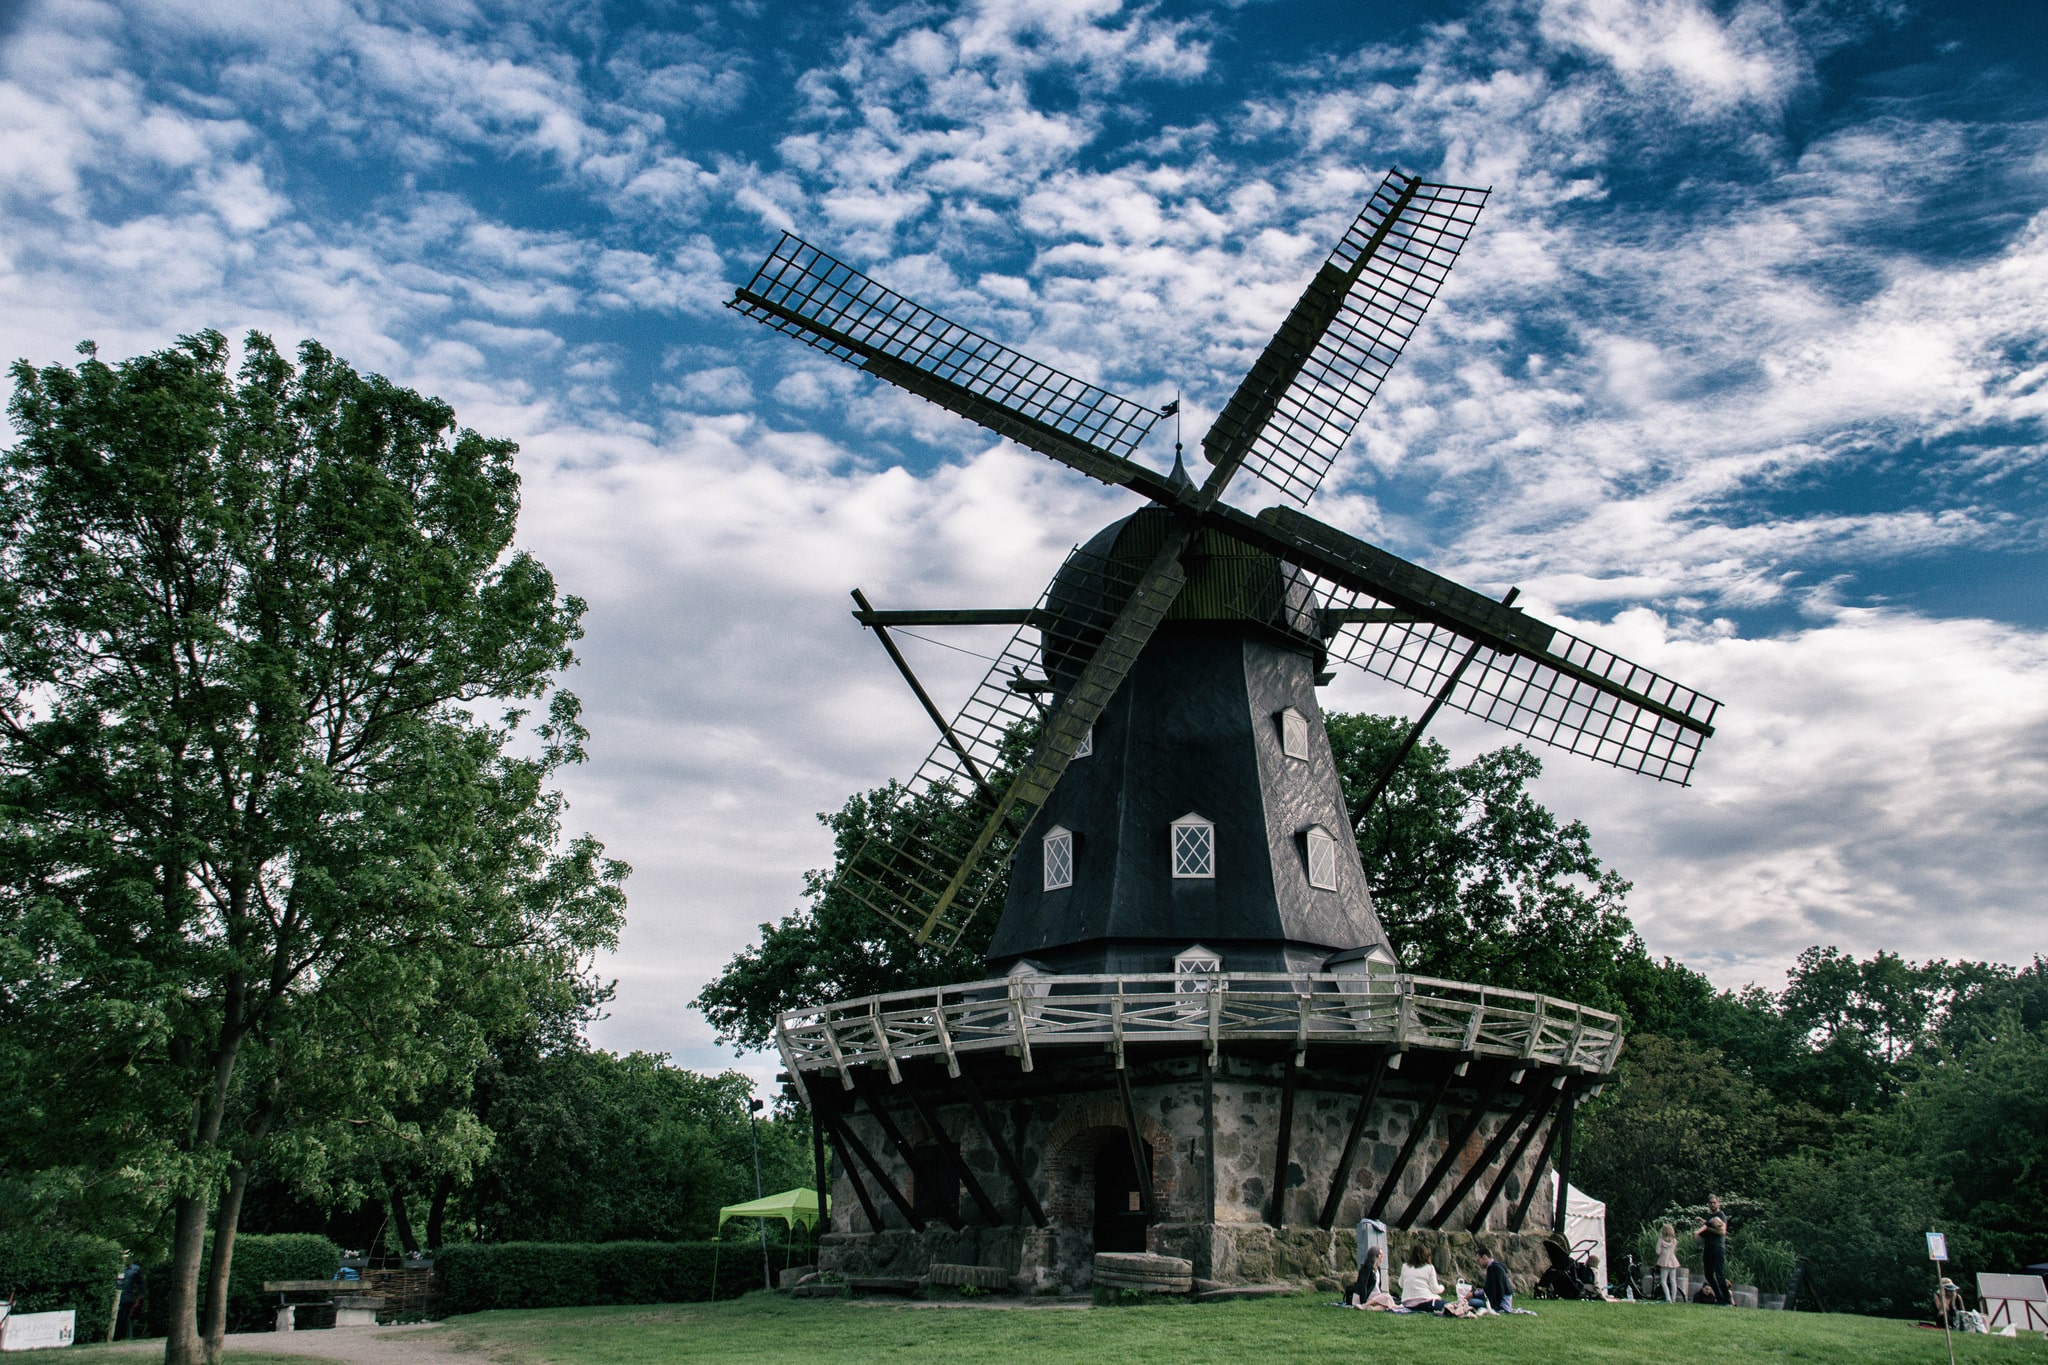 Biofriendly image of the day, Classic windmill